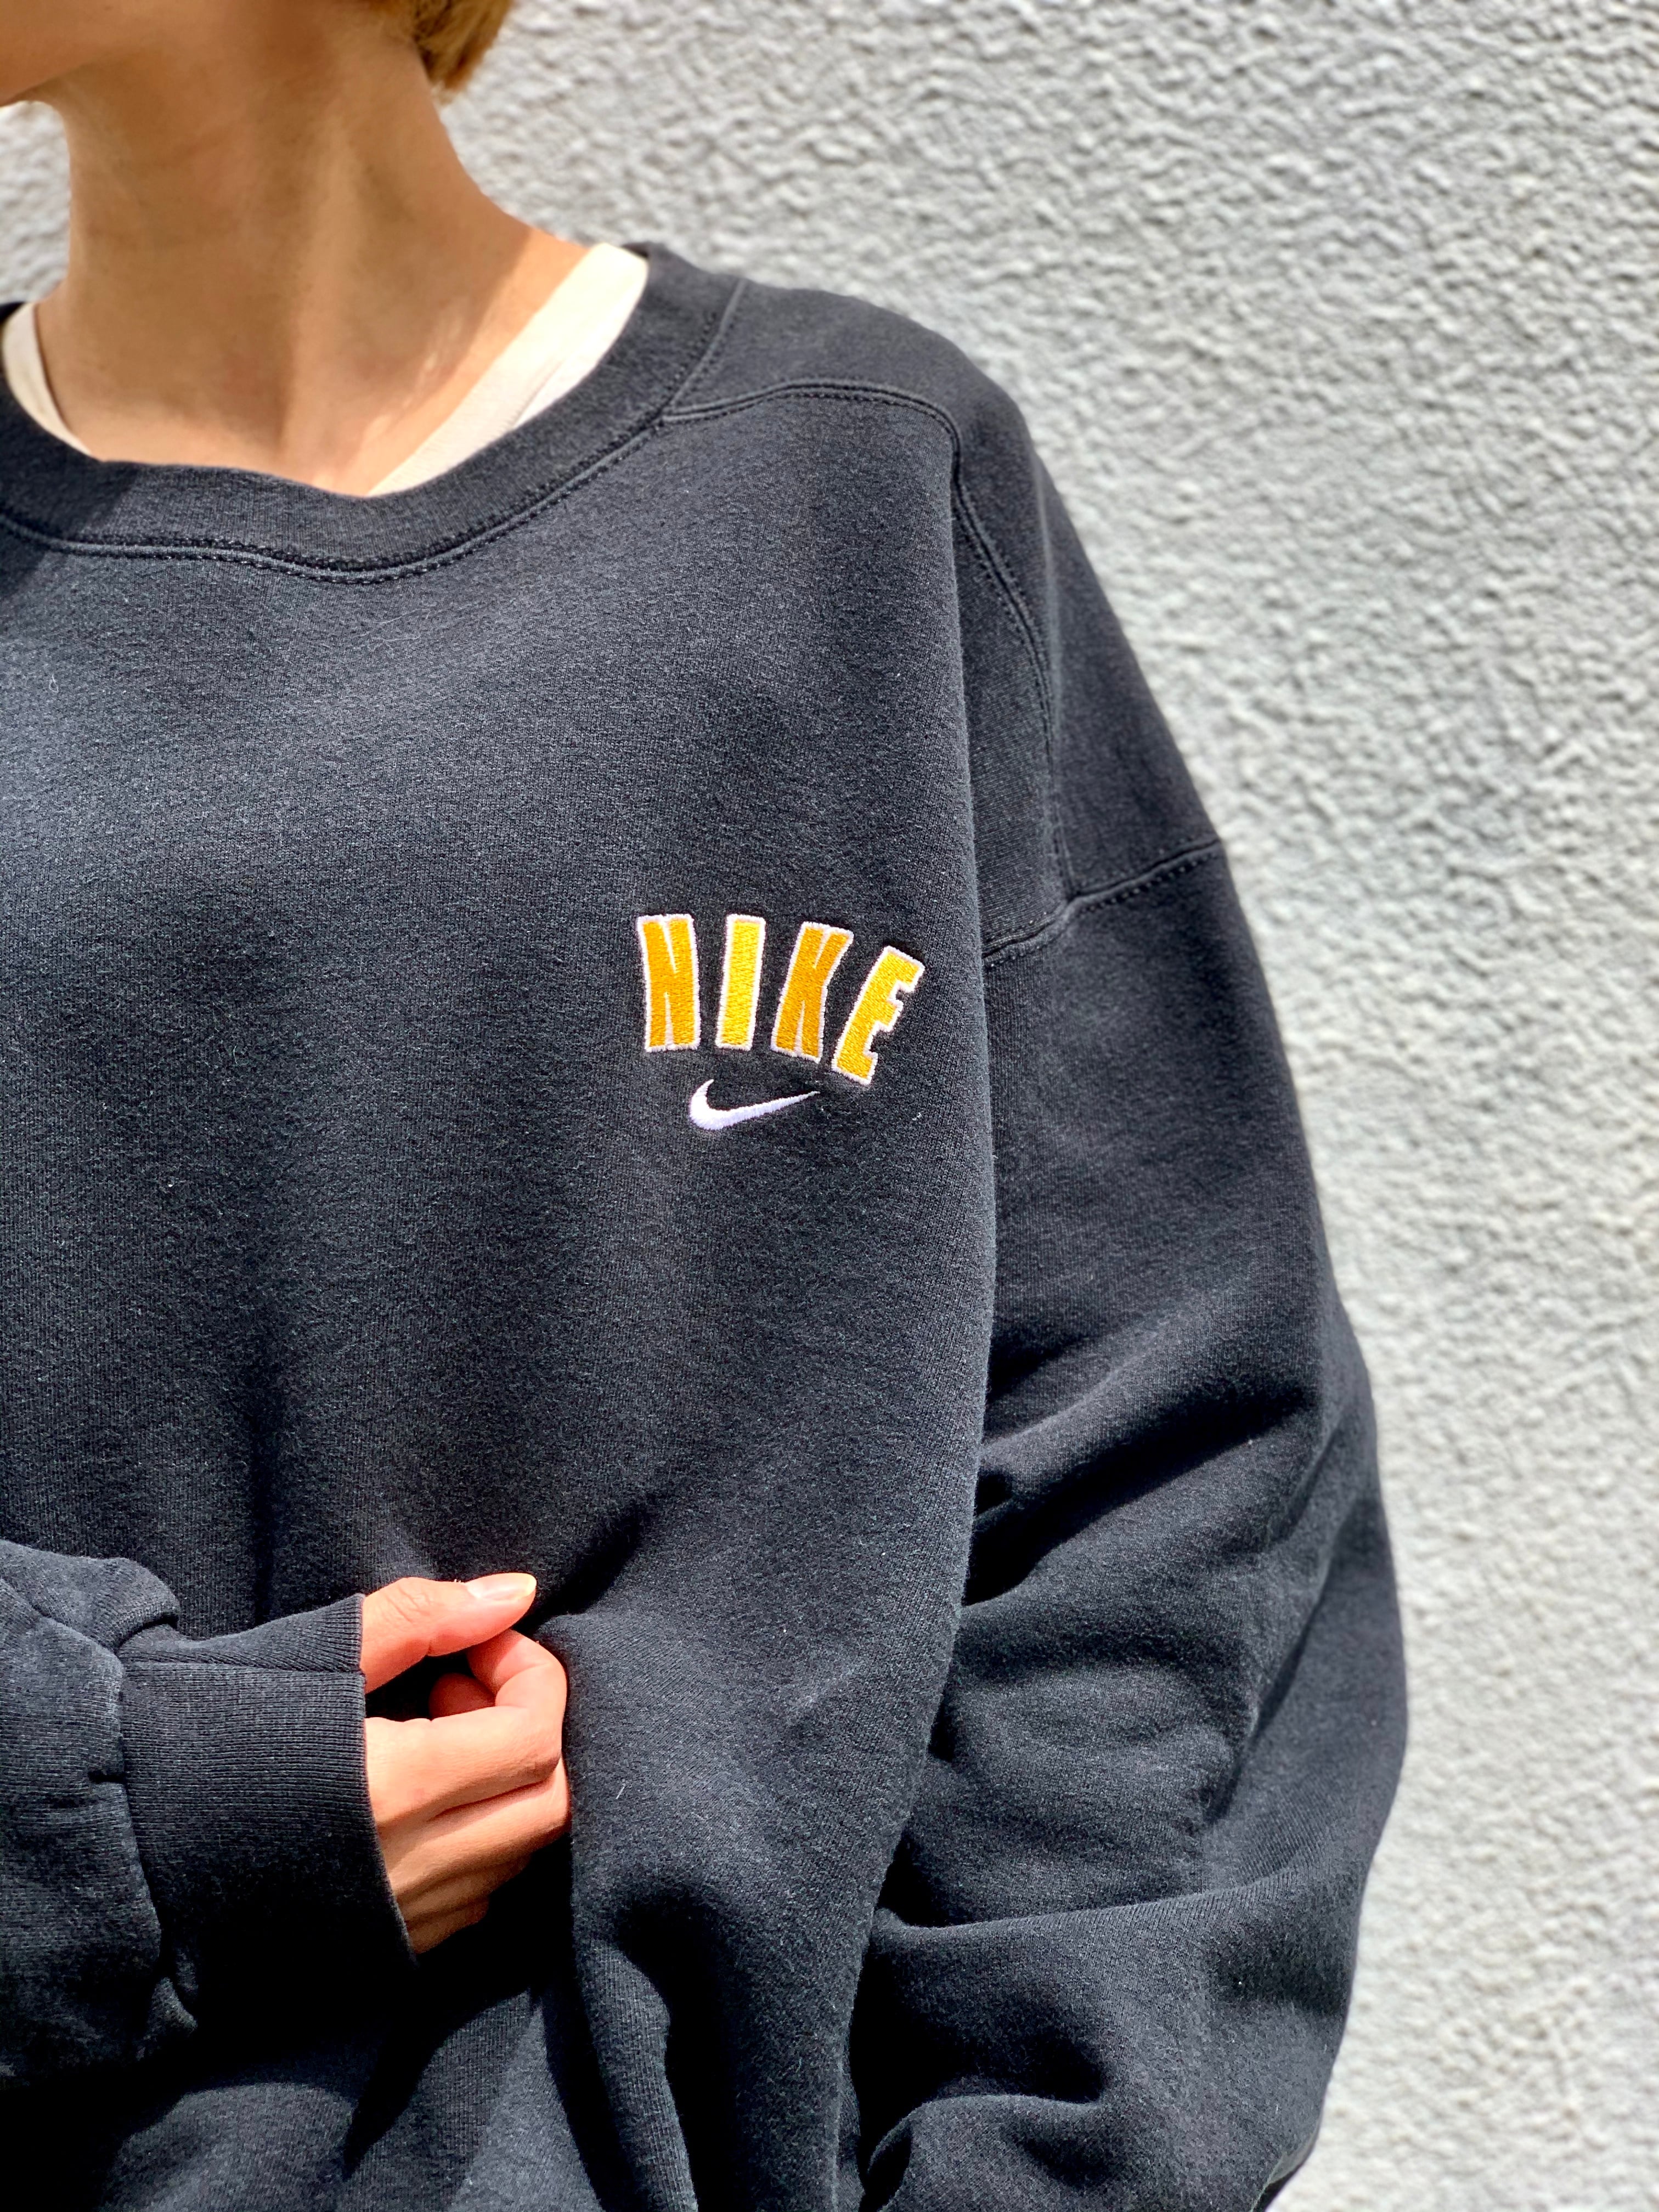 90's−old“l/s sweat” “NIKE” made in USA | KEY WEB STORE